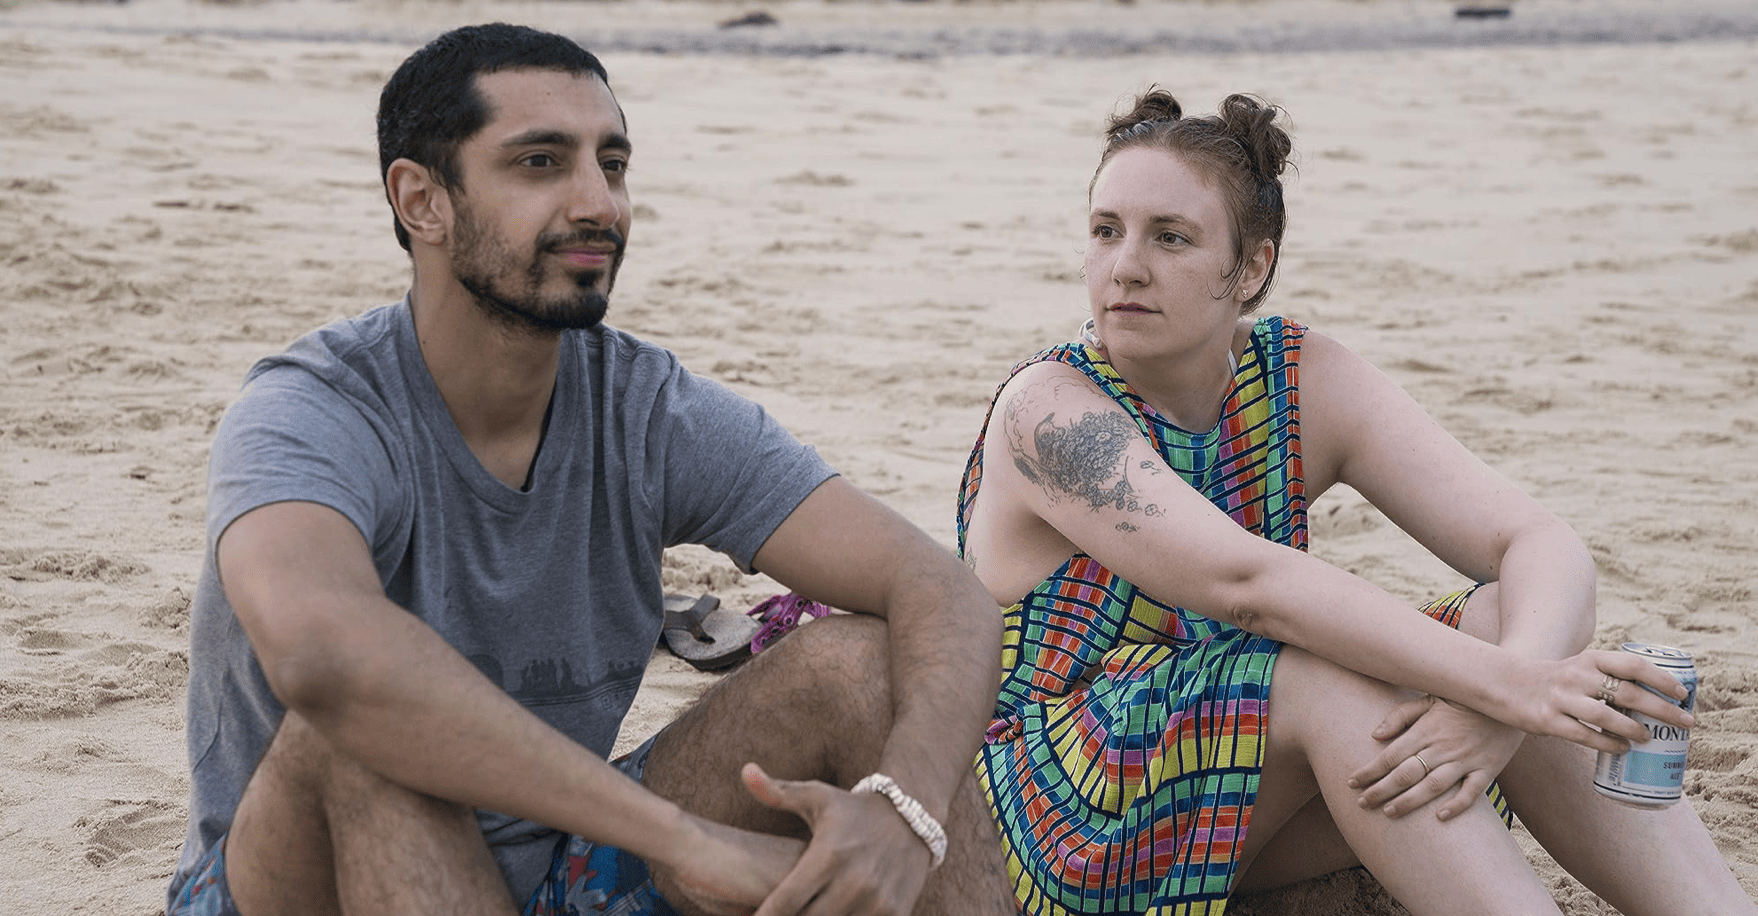 Hannah (Lena Dunham) stares longingly at Paul-Louis (Riz Ahmed) while sitting at the beach with drinks in hand in this image from Apatow Productions.